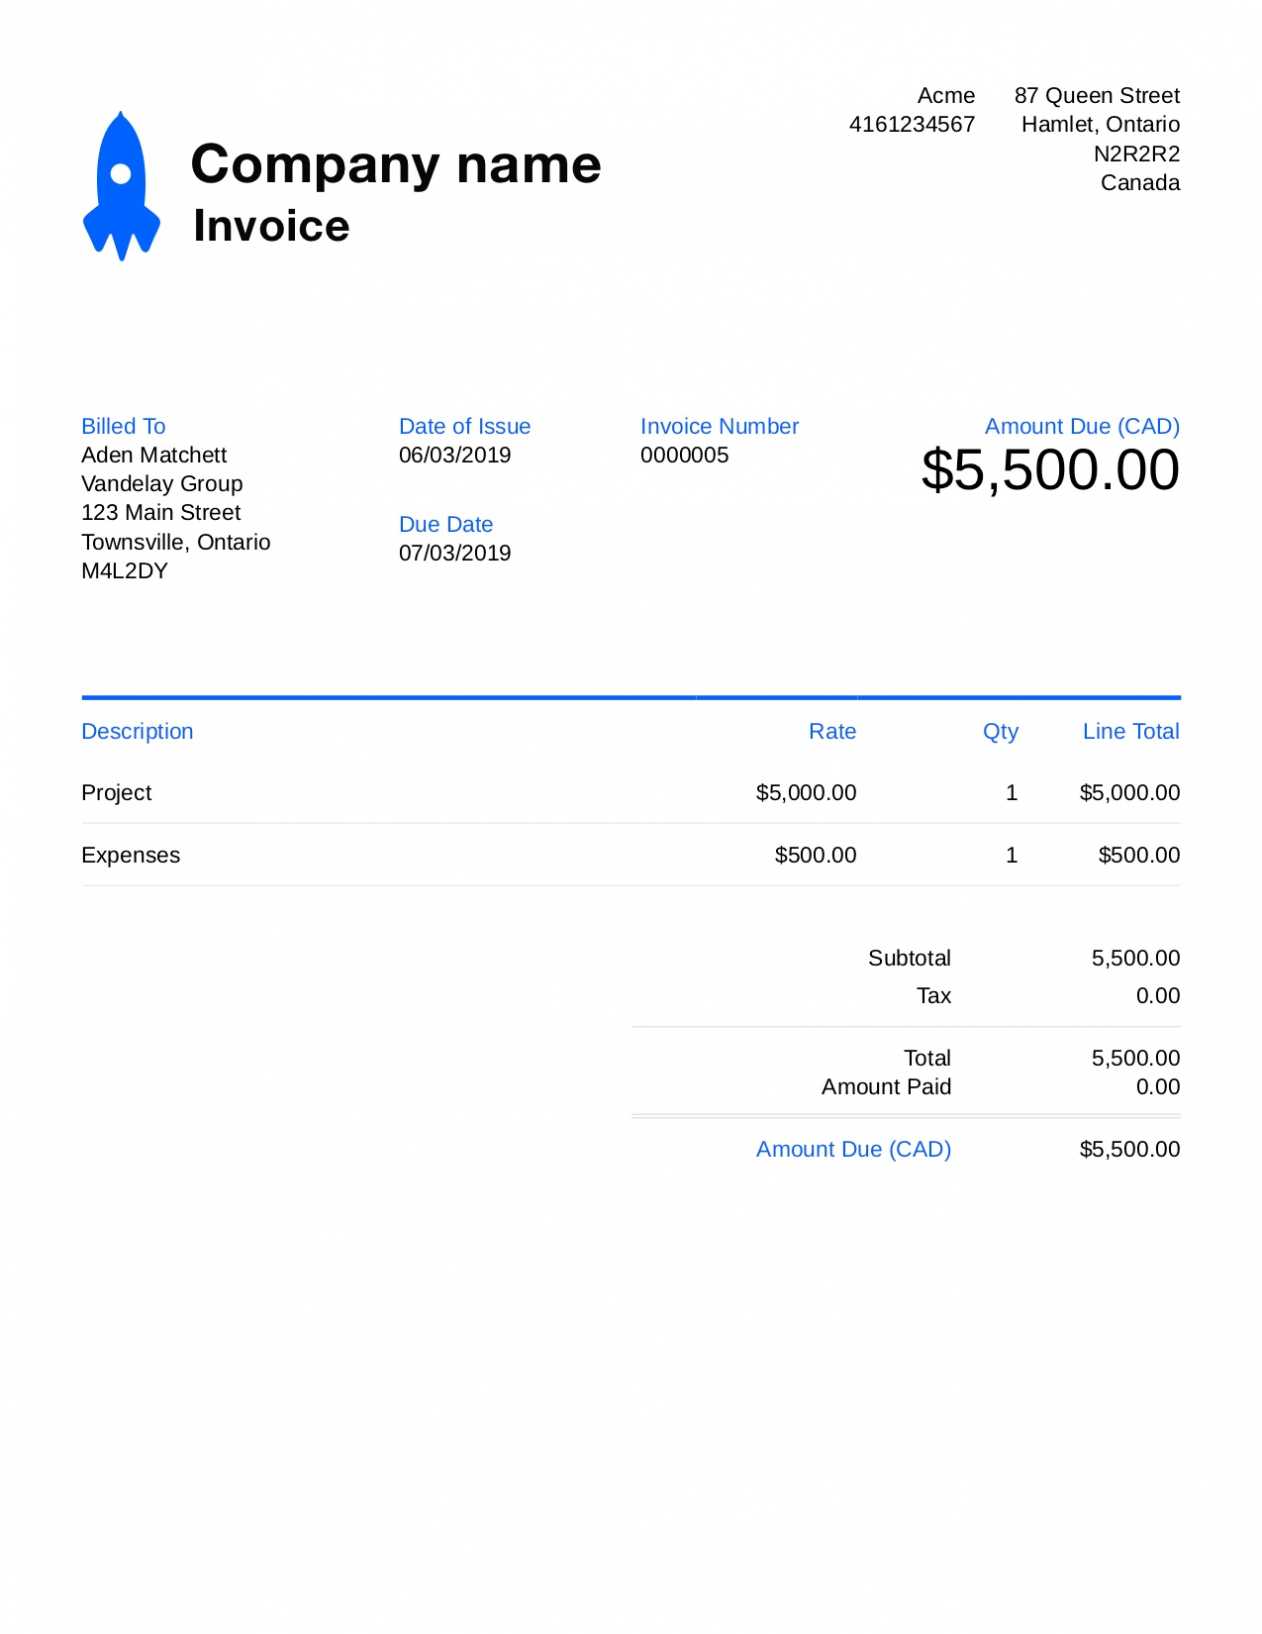 The Best Invoice Templates For The Uk | 2020 Reviews with Business Invoice Template Uk